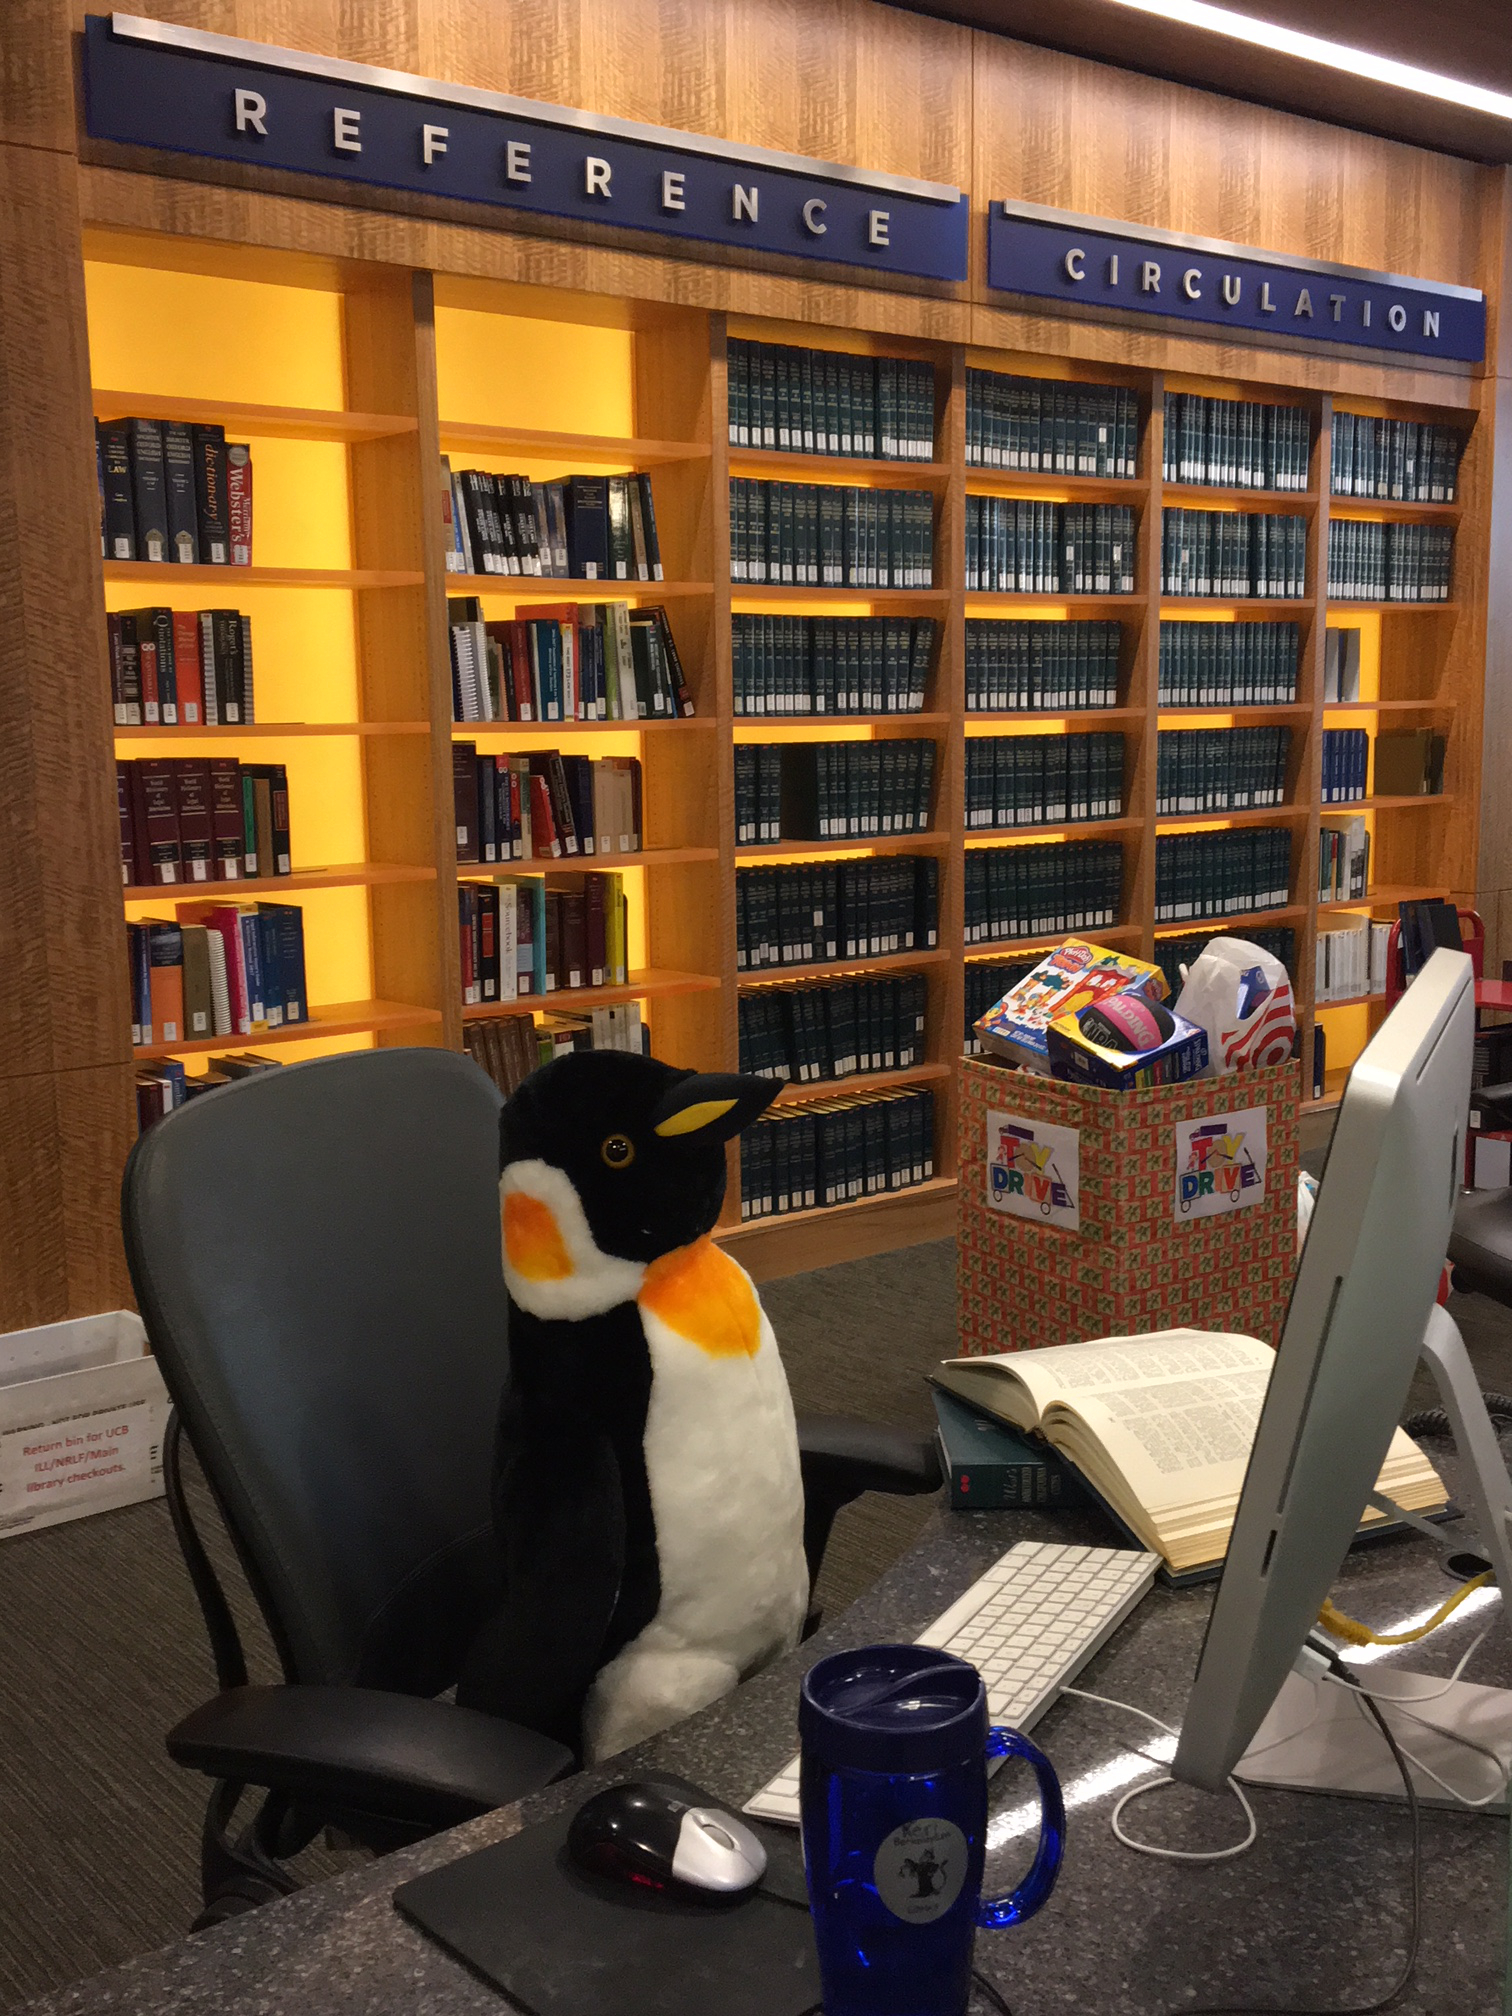 Penguin sitting at the Reference Desk